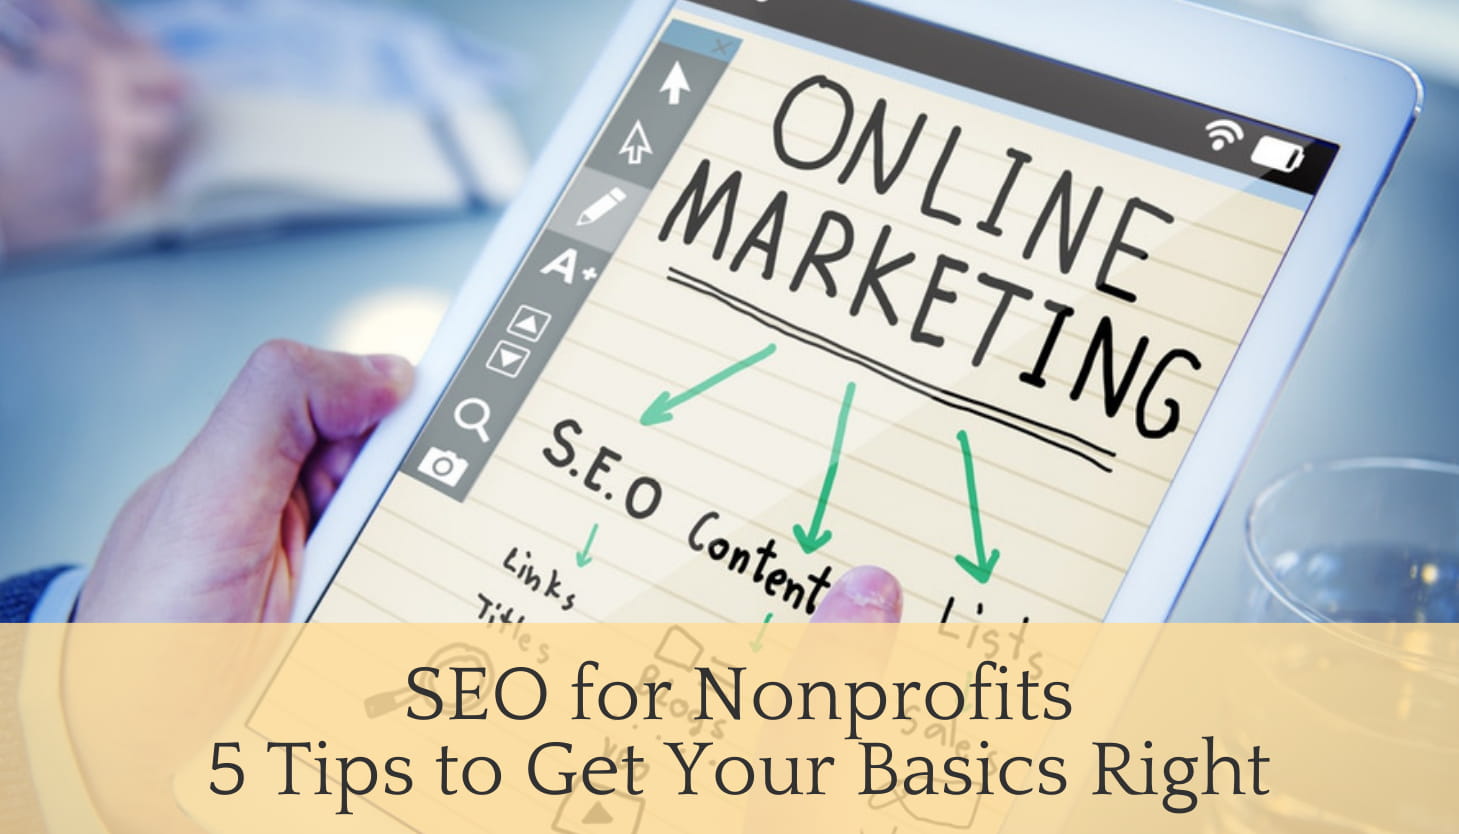 8 Practical SEO Tips & Best Practices for Nonprofits | Donorbox